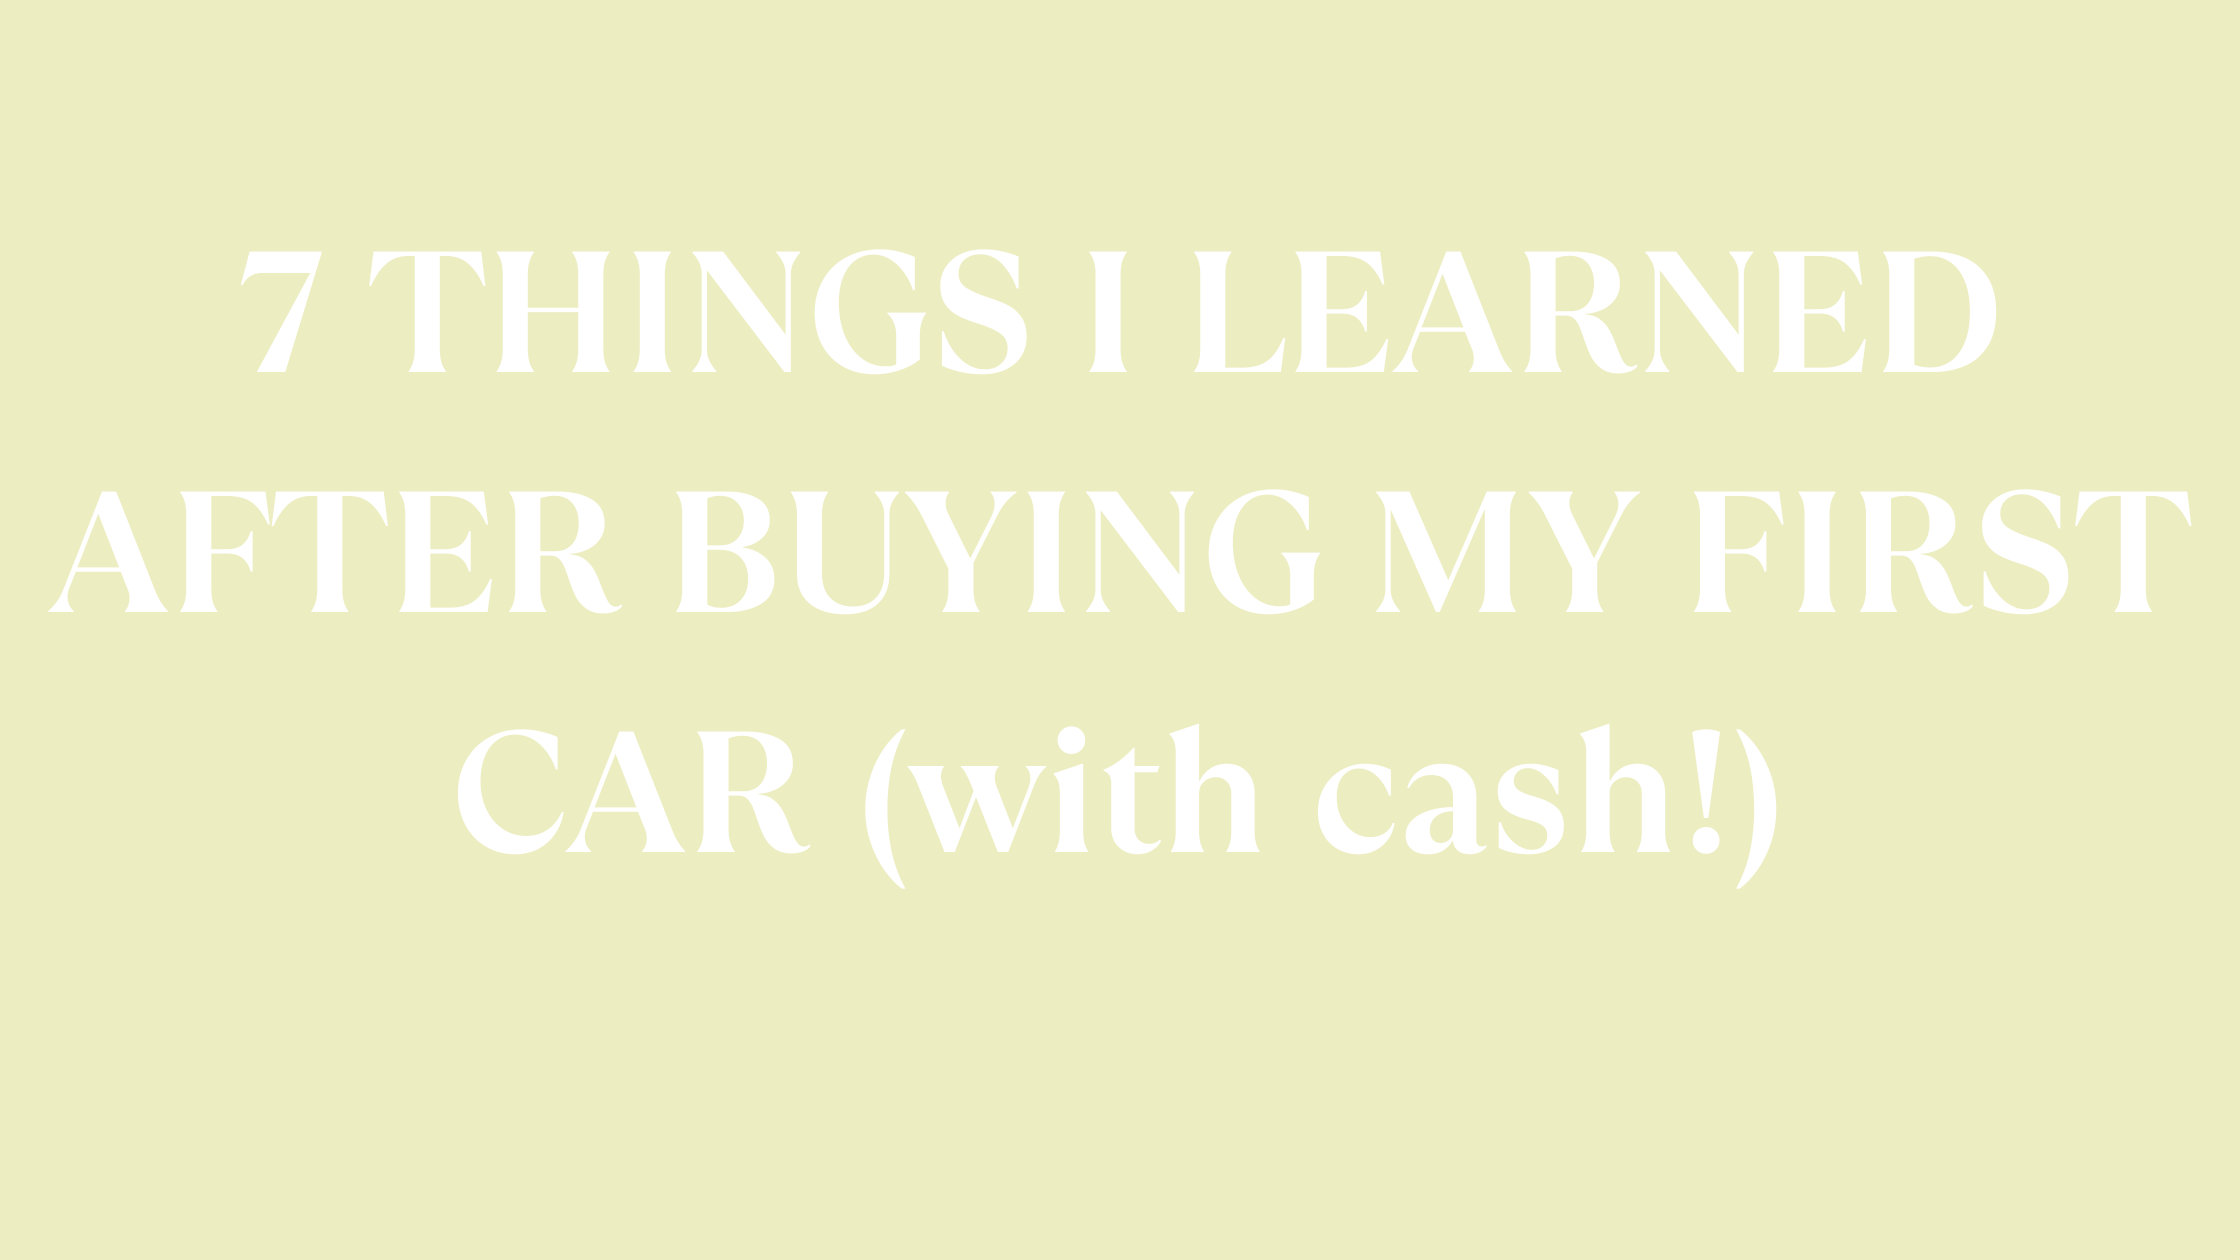 7 THINGS I LEARNED BUYING MY FIRST CAR (with cash!)​